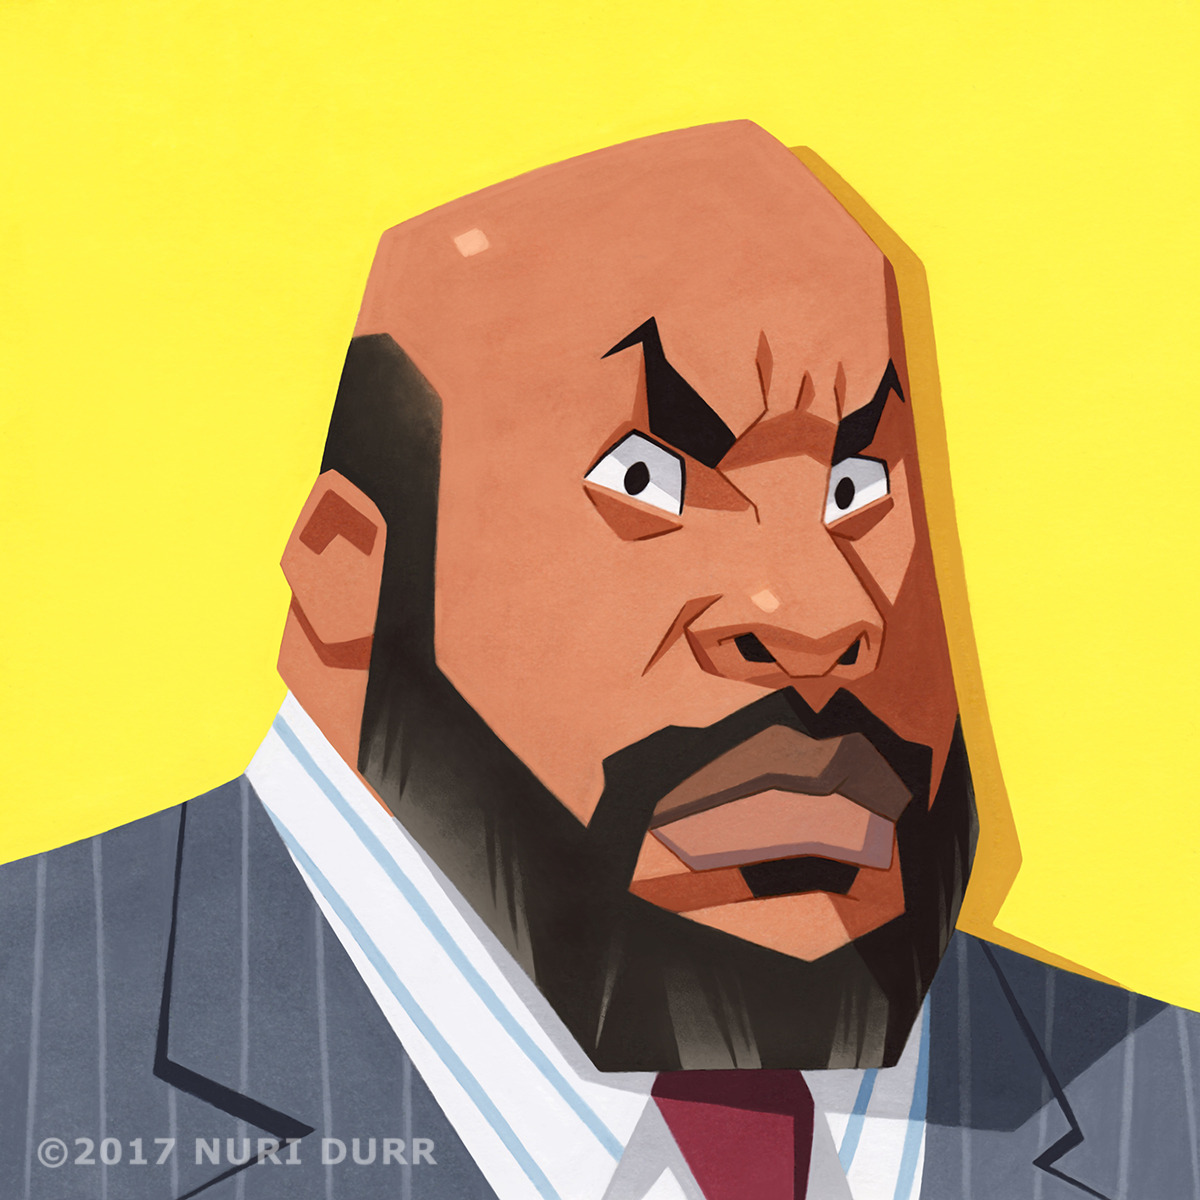 nuridurr:  I did as series of pieces inspired by The Fresh Prince of Bel-Air. Prints